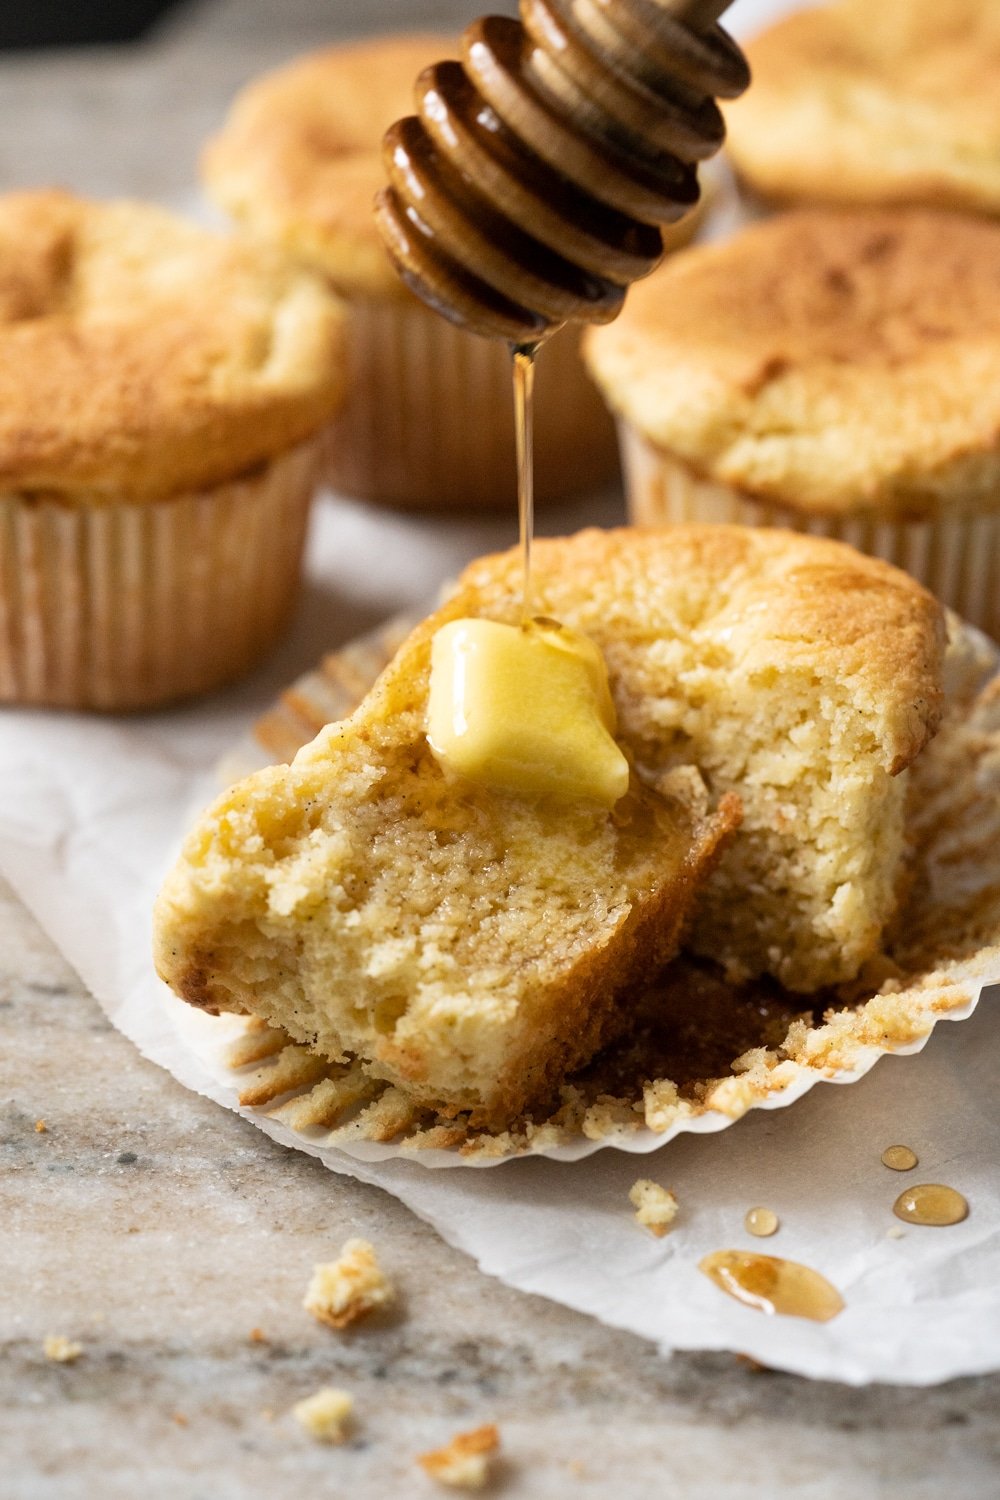 Drizzling keto maple syrup onto a halved low carb cornbread muffin